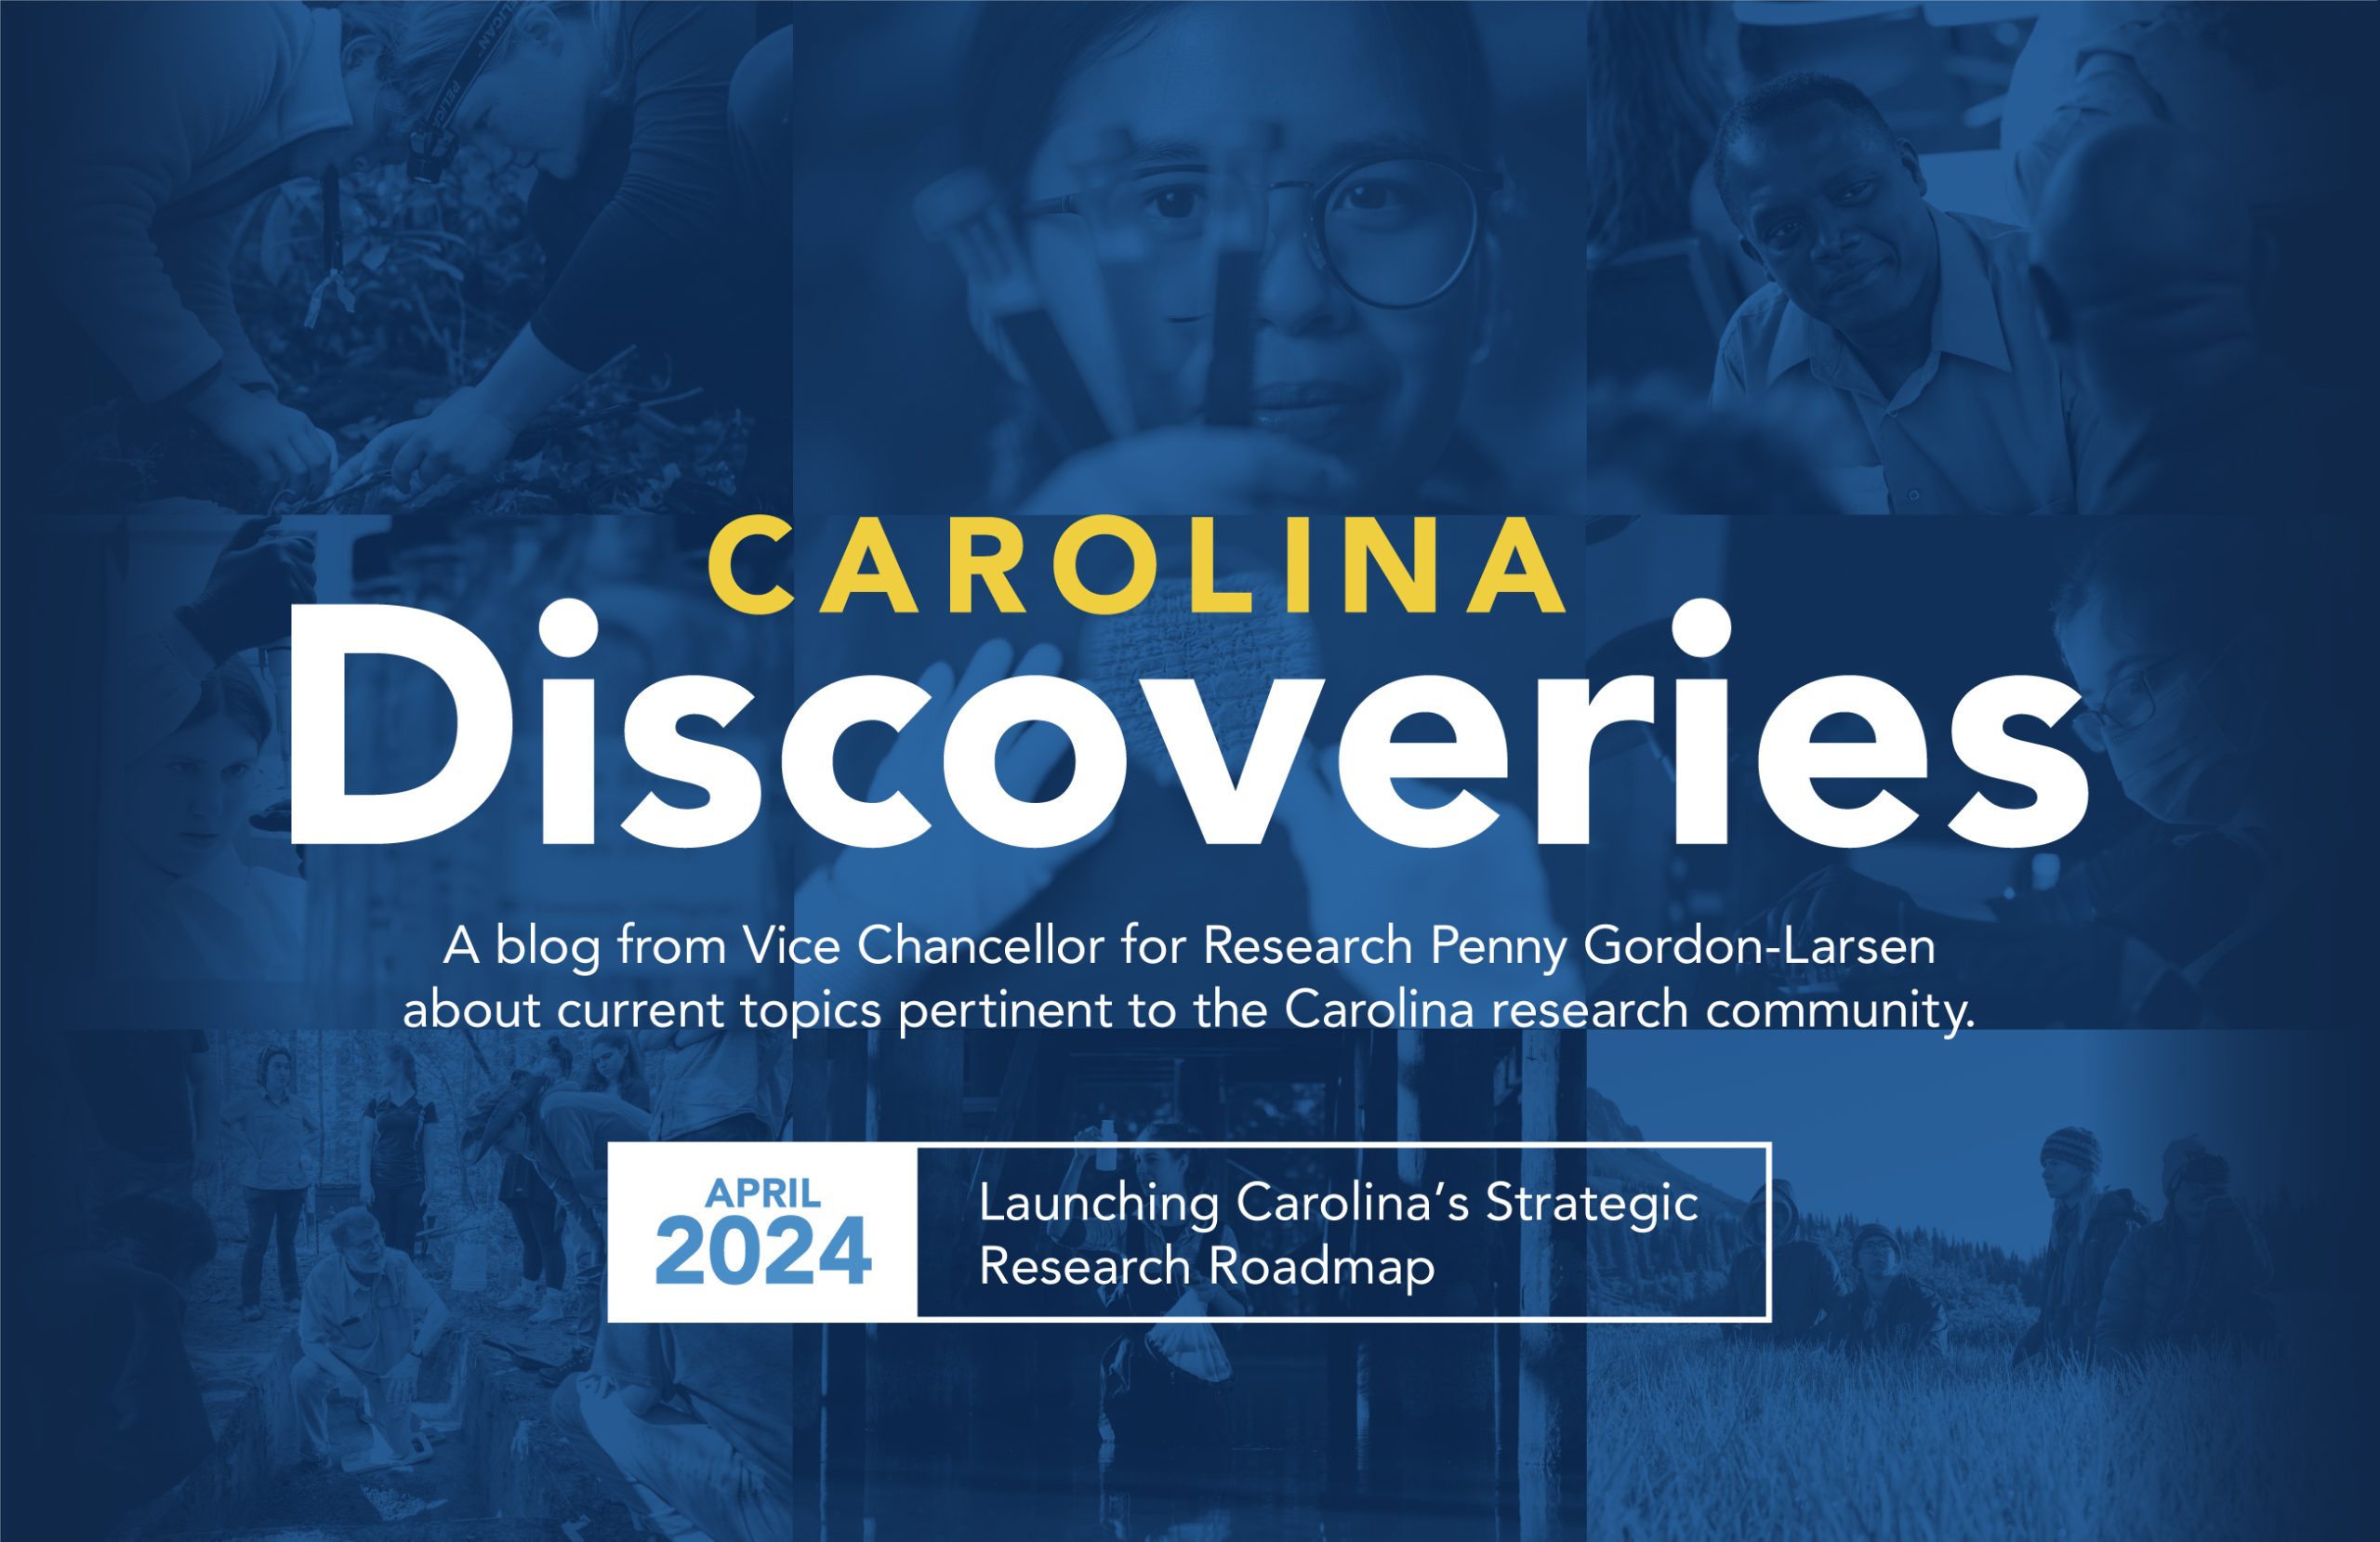 Carolina Discoveries: A blog from Vice Chancellor for Research Penny Gordon-Larsen about current topics pertinent to the Carolina research community. Click here.